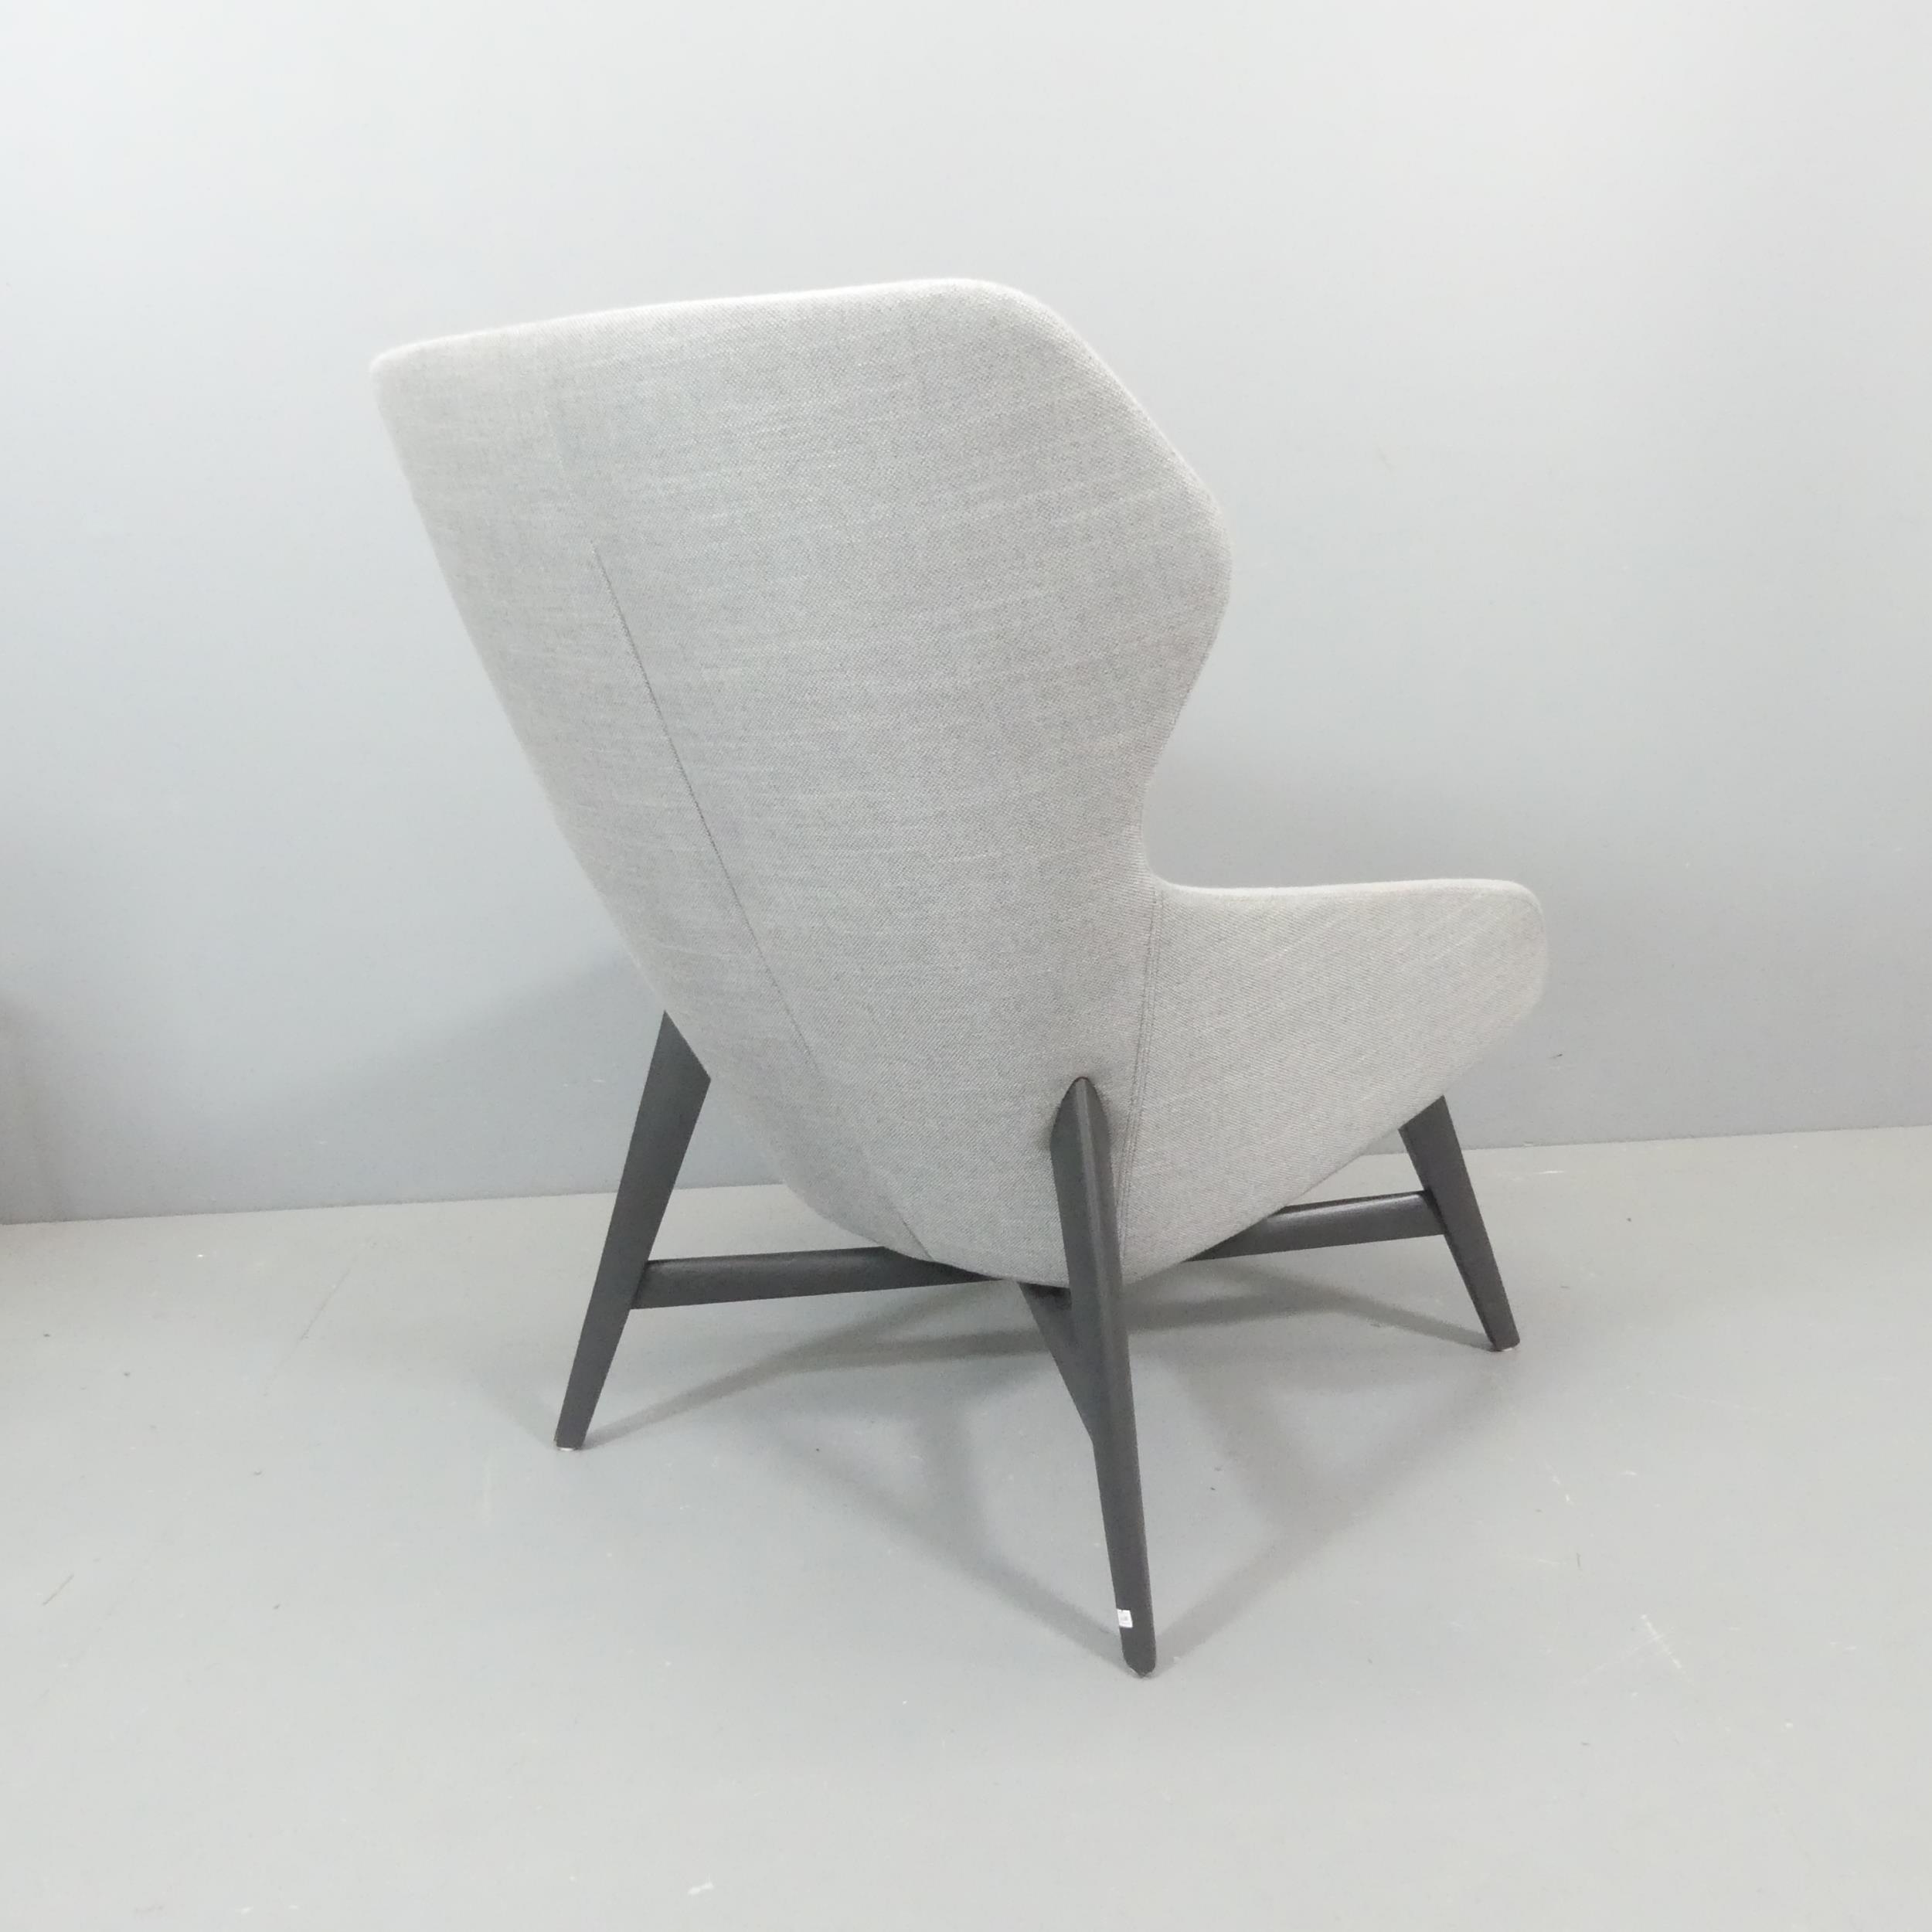 BRUNNER - A contemporary designer Ray lounge chair by Jens and Laub, the upholstered shell seat on - Image 2 of 3